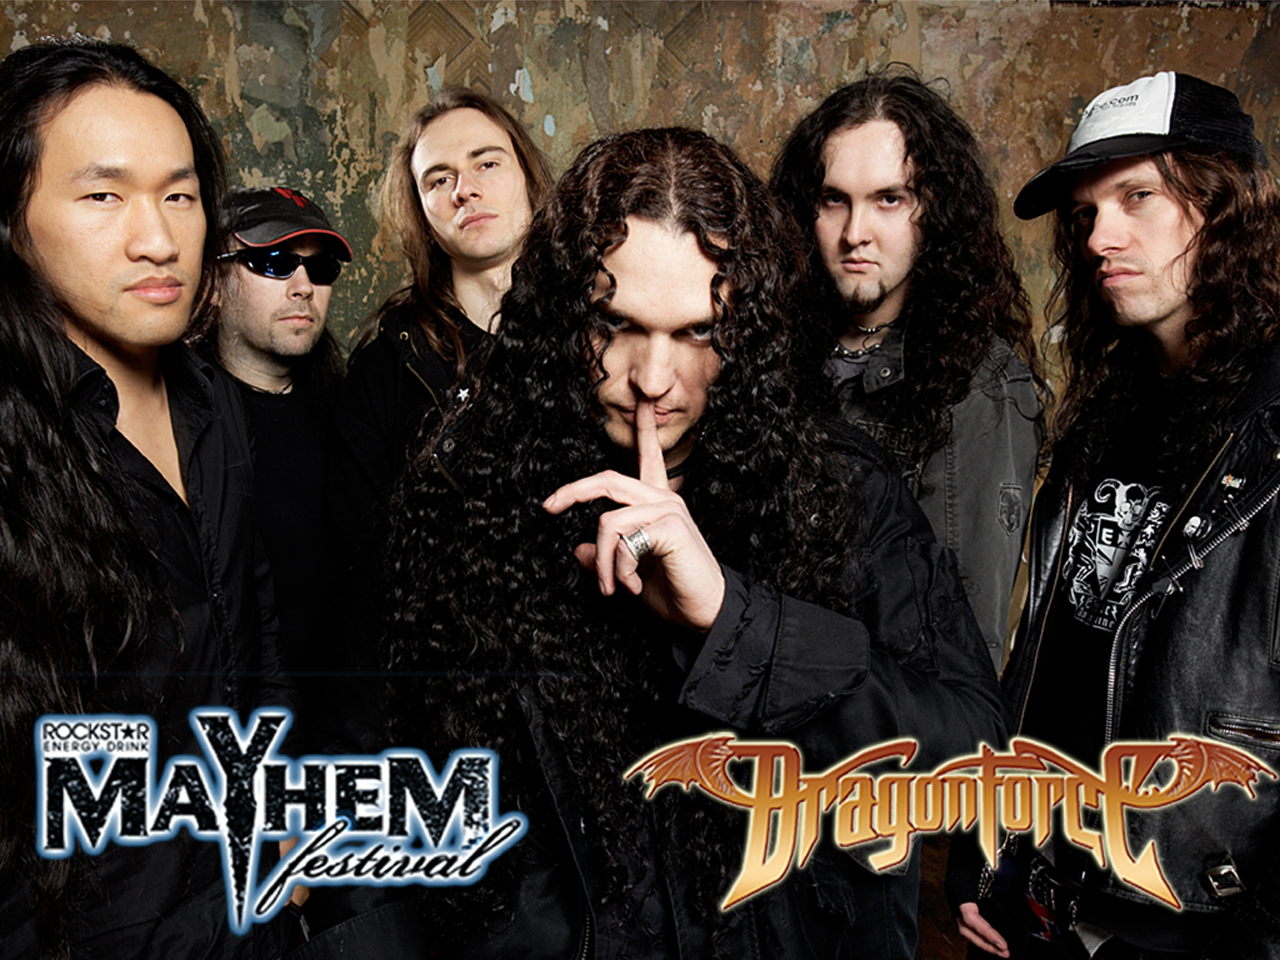 DragonForce  Wallpapers